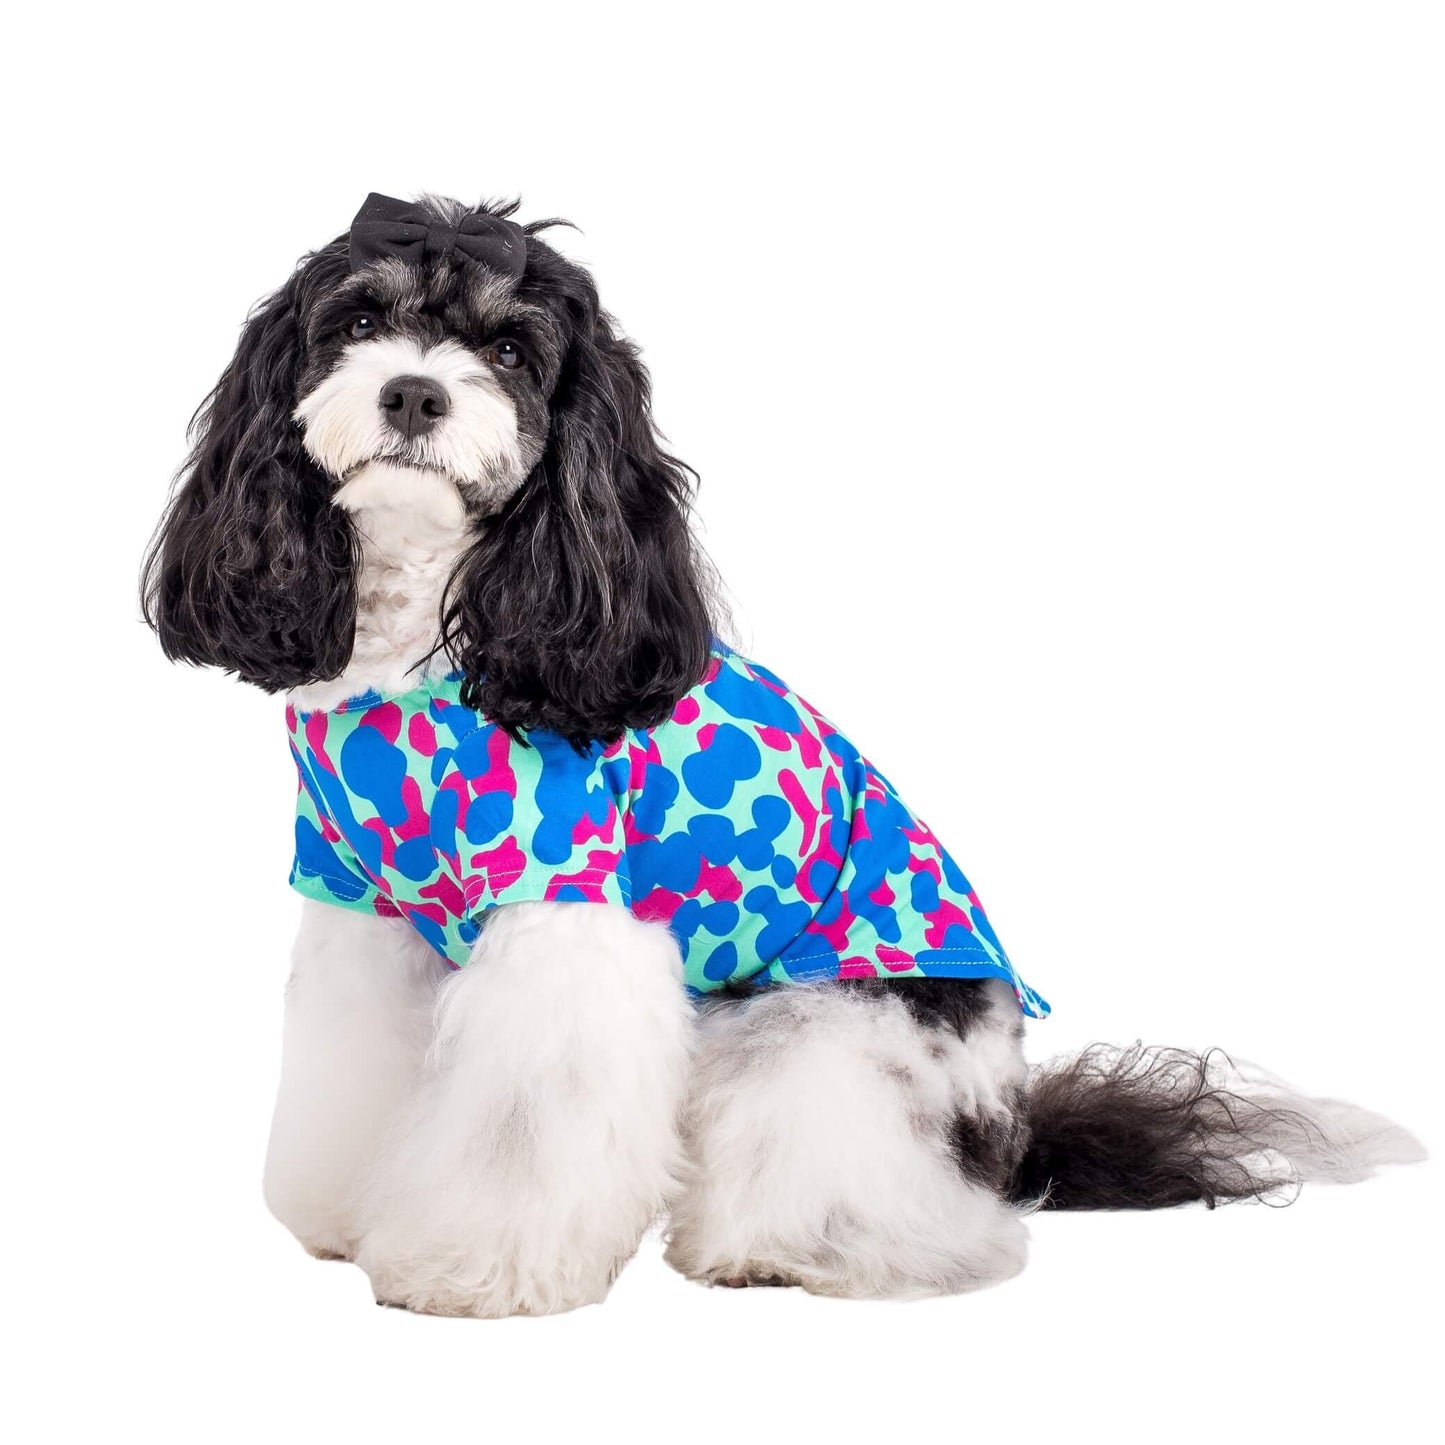 Rosie the Cavoodle standing side on to the camera. It is wearing a Painted on dog shirt made by Vibrant Hound. The print is pink and blue blobs.